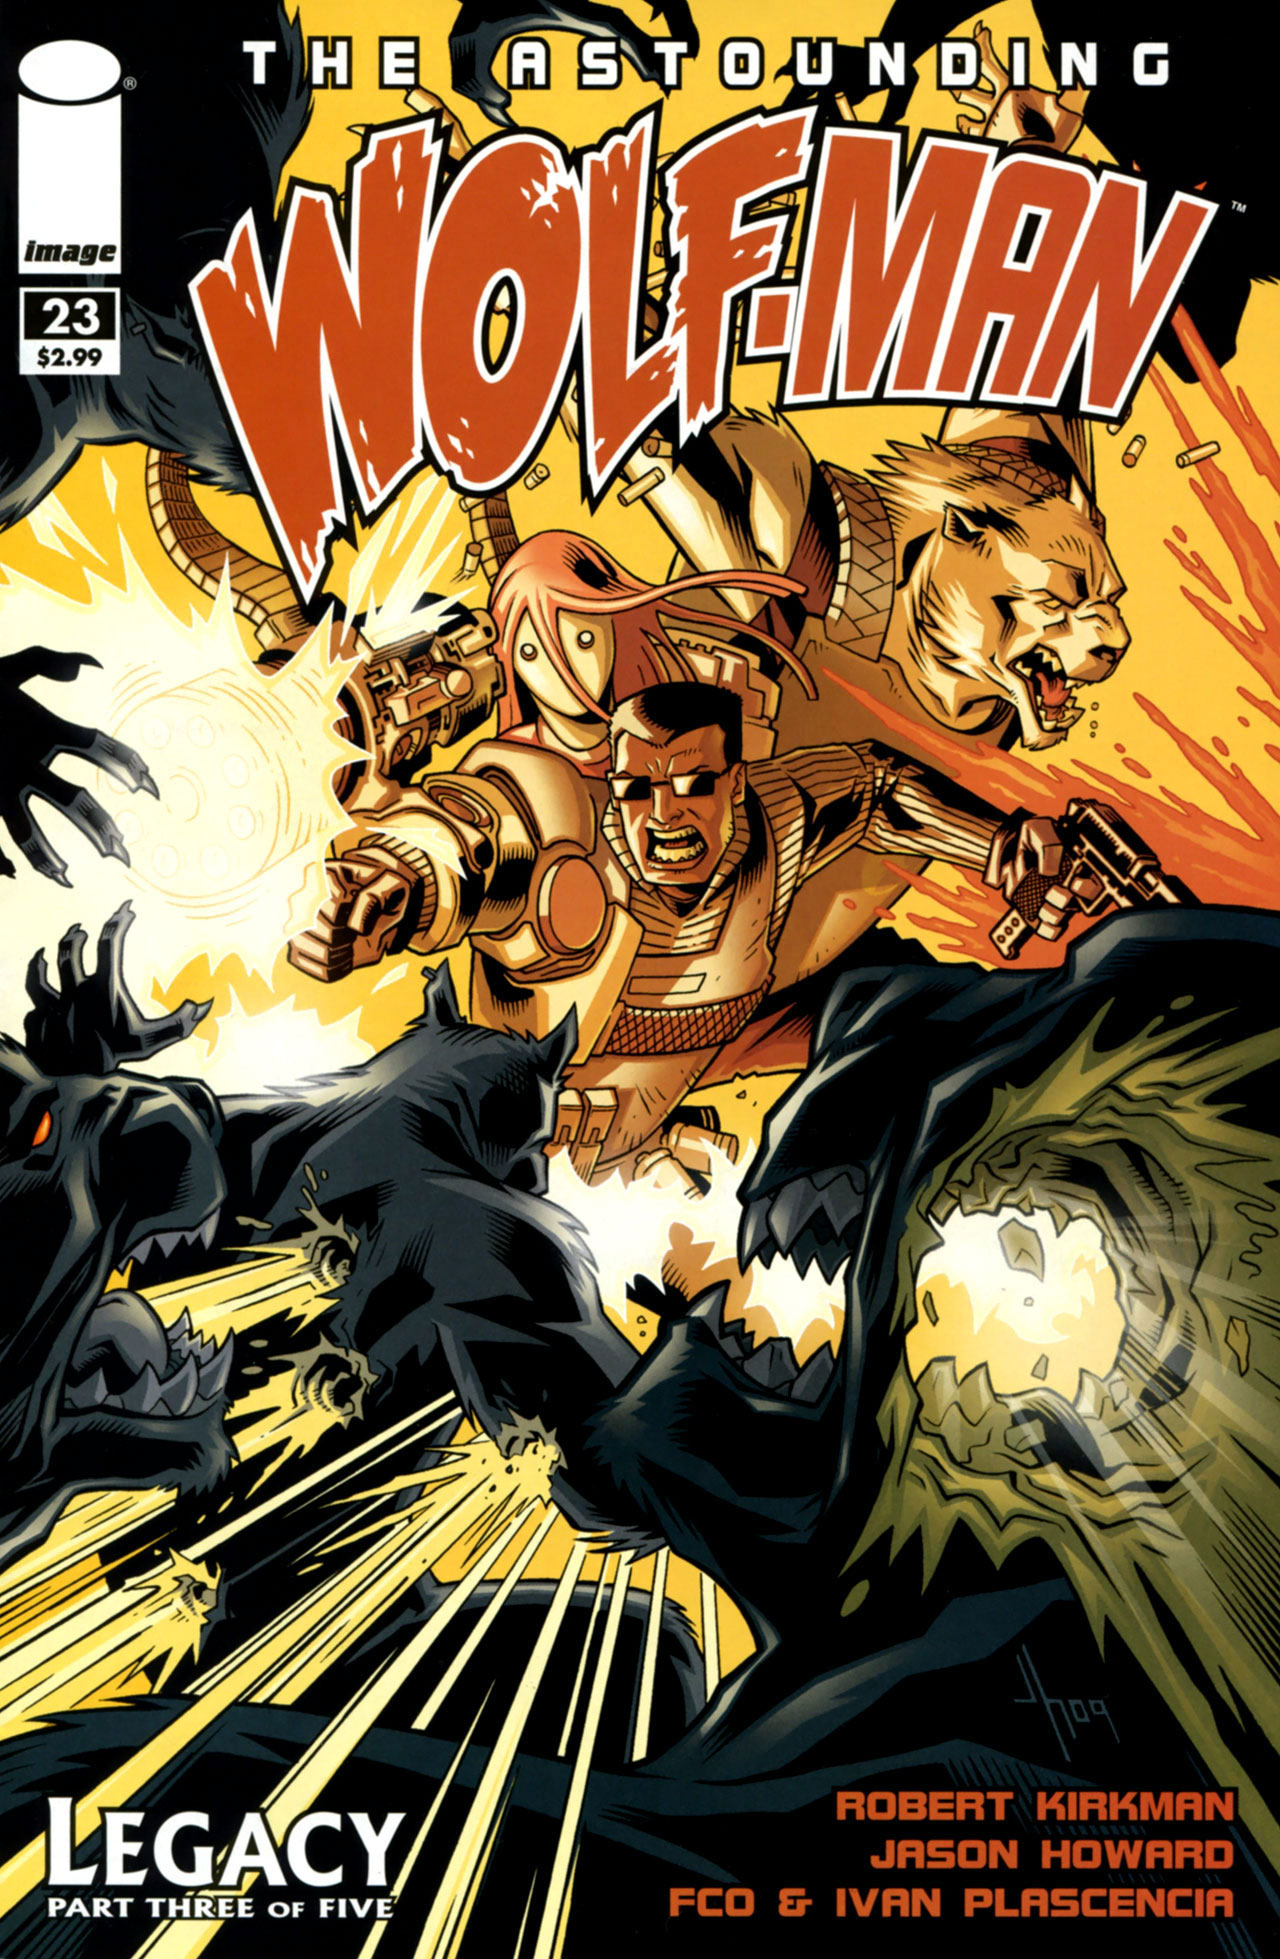 Read online The Astounding Wolf-Man comic -  Issue #23 - 1